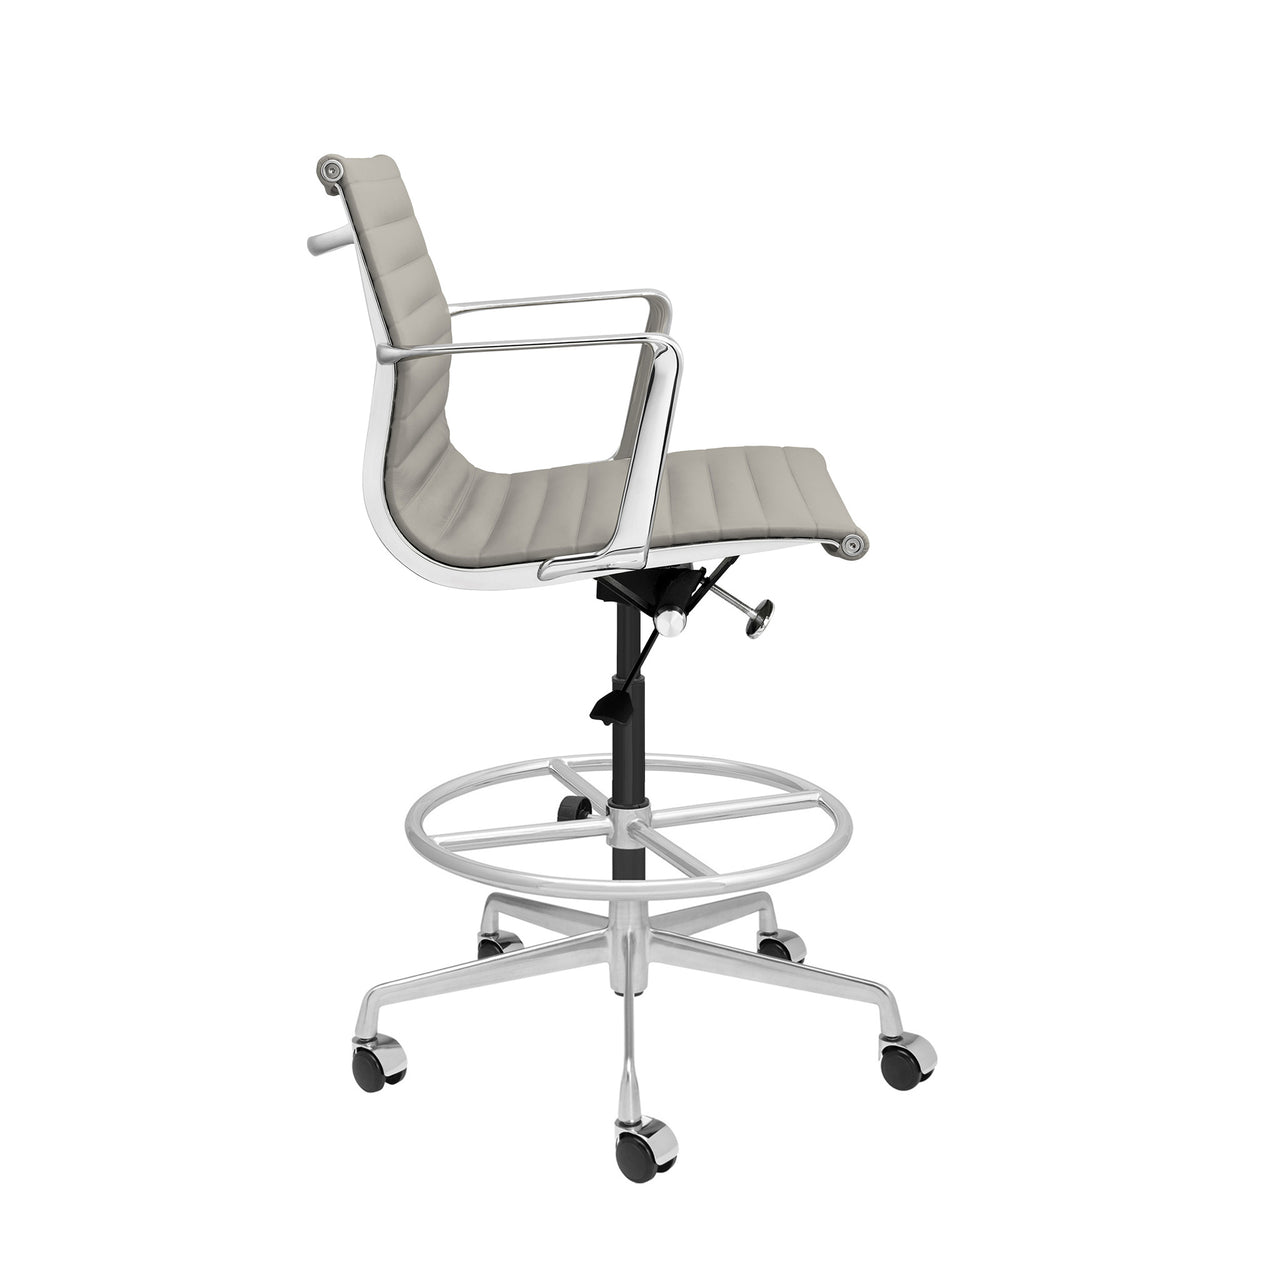 Pro Ribbed Drafting Chair (Grey Italian Leather)